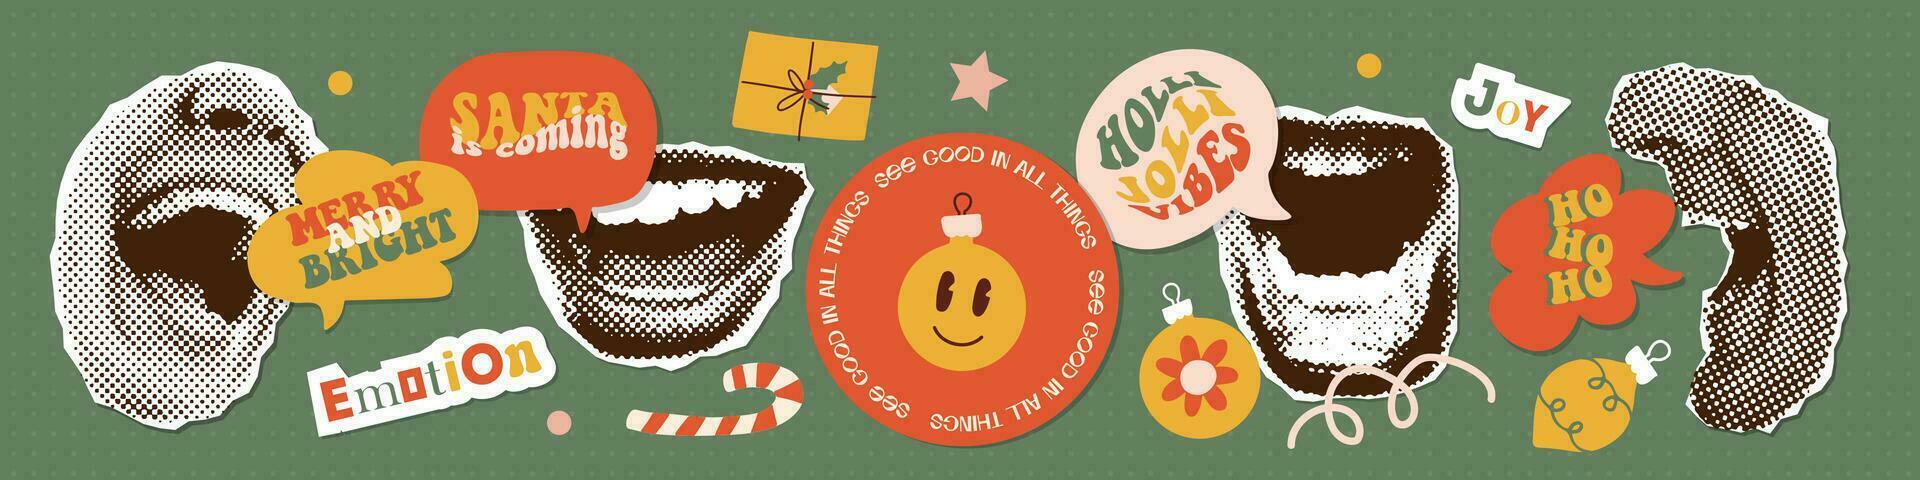 Emotional vintage halftone mouth elements with warm Christmas Greetings in speech bubbles. Paper torn out mixed media stickers with bright doodle elements. Vector illustrations pack.